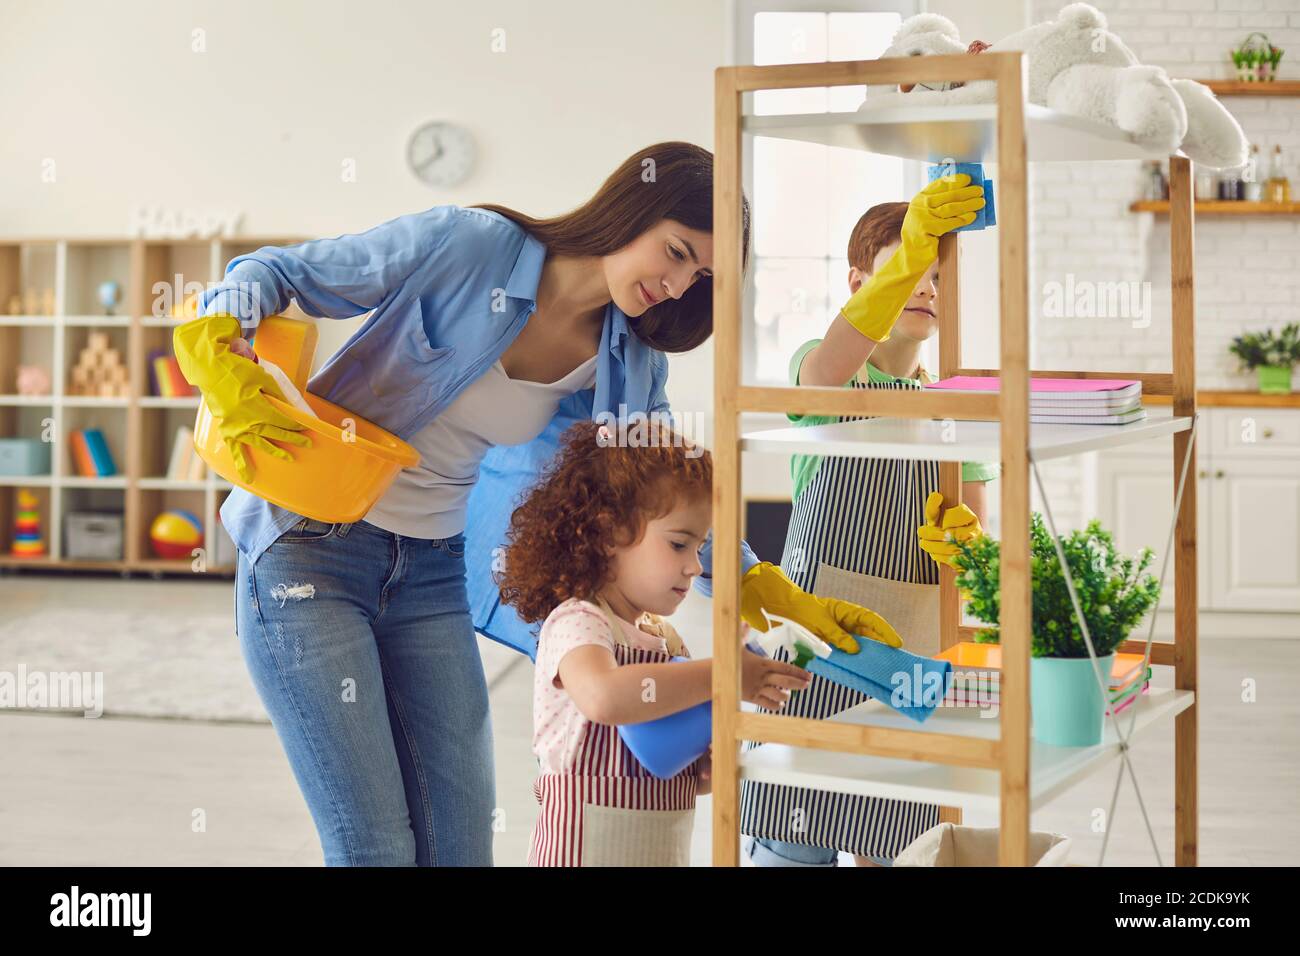 Family cleaning house, hygiene. Cleanliness and tidiness, housecleaning. Stock Photo